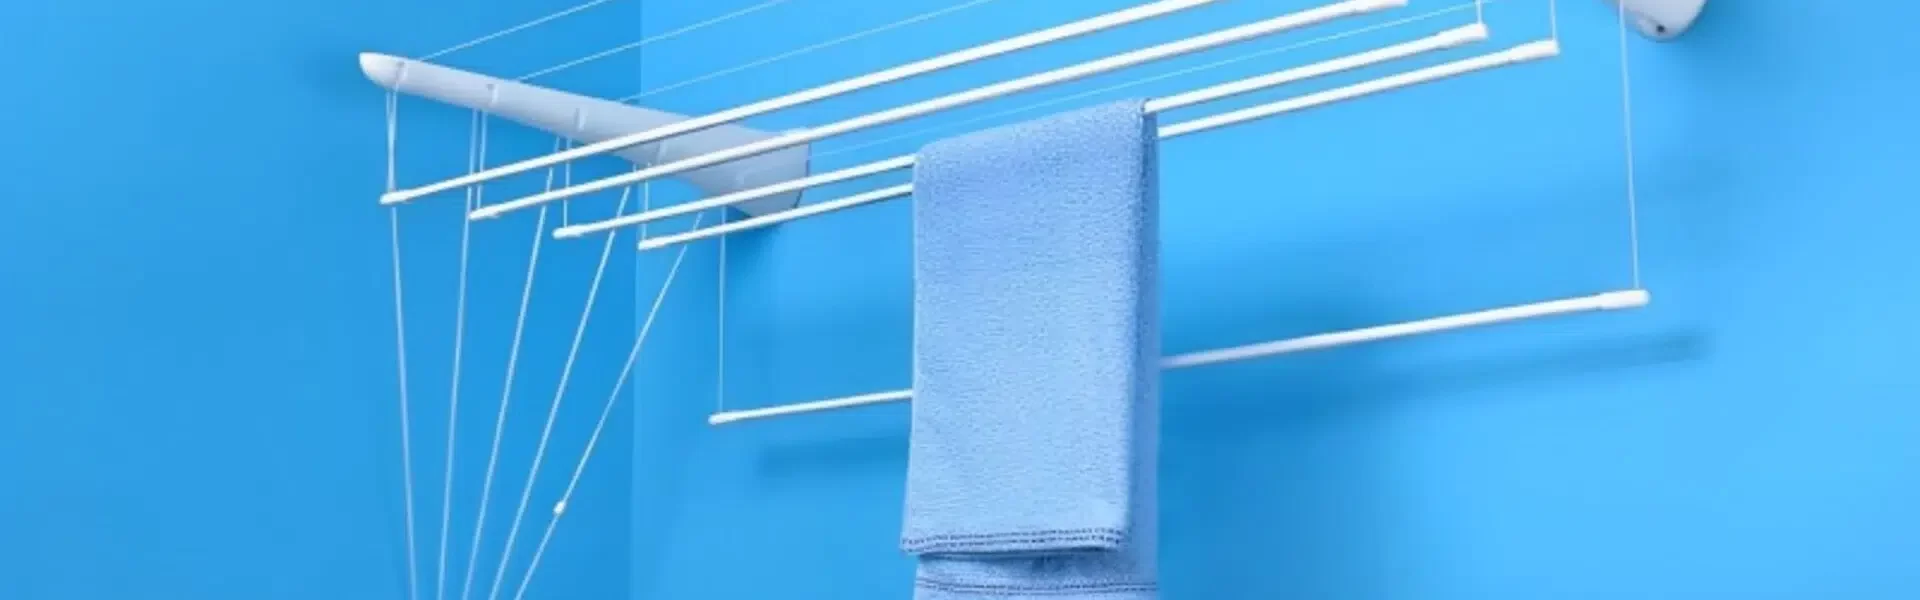 Master Netting Ceiling Clothes Drying Hanger